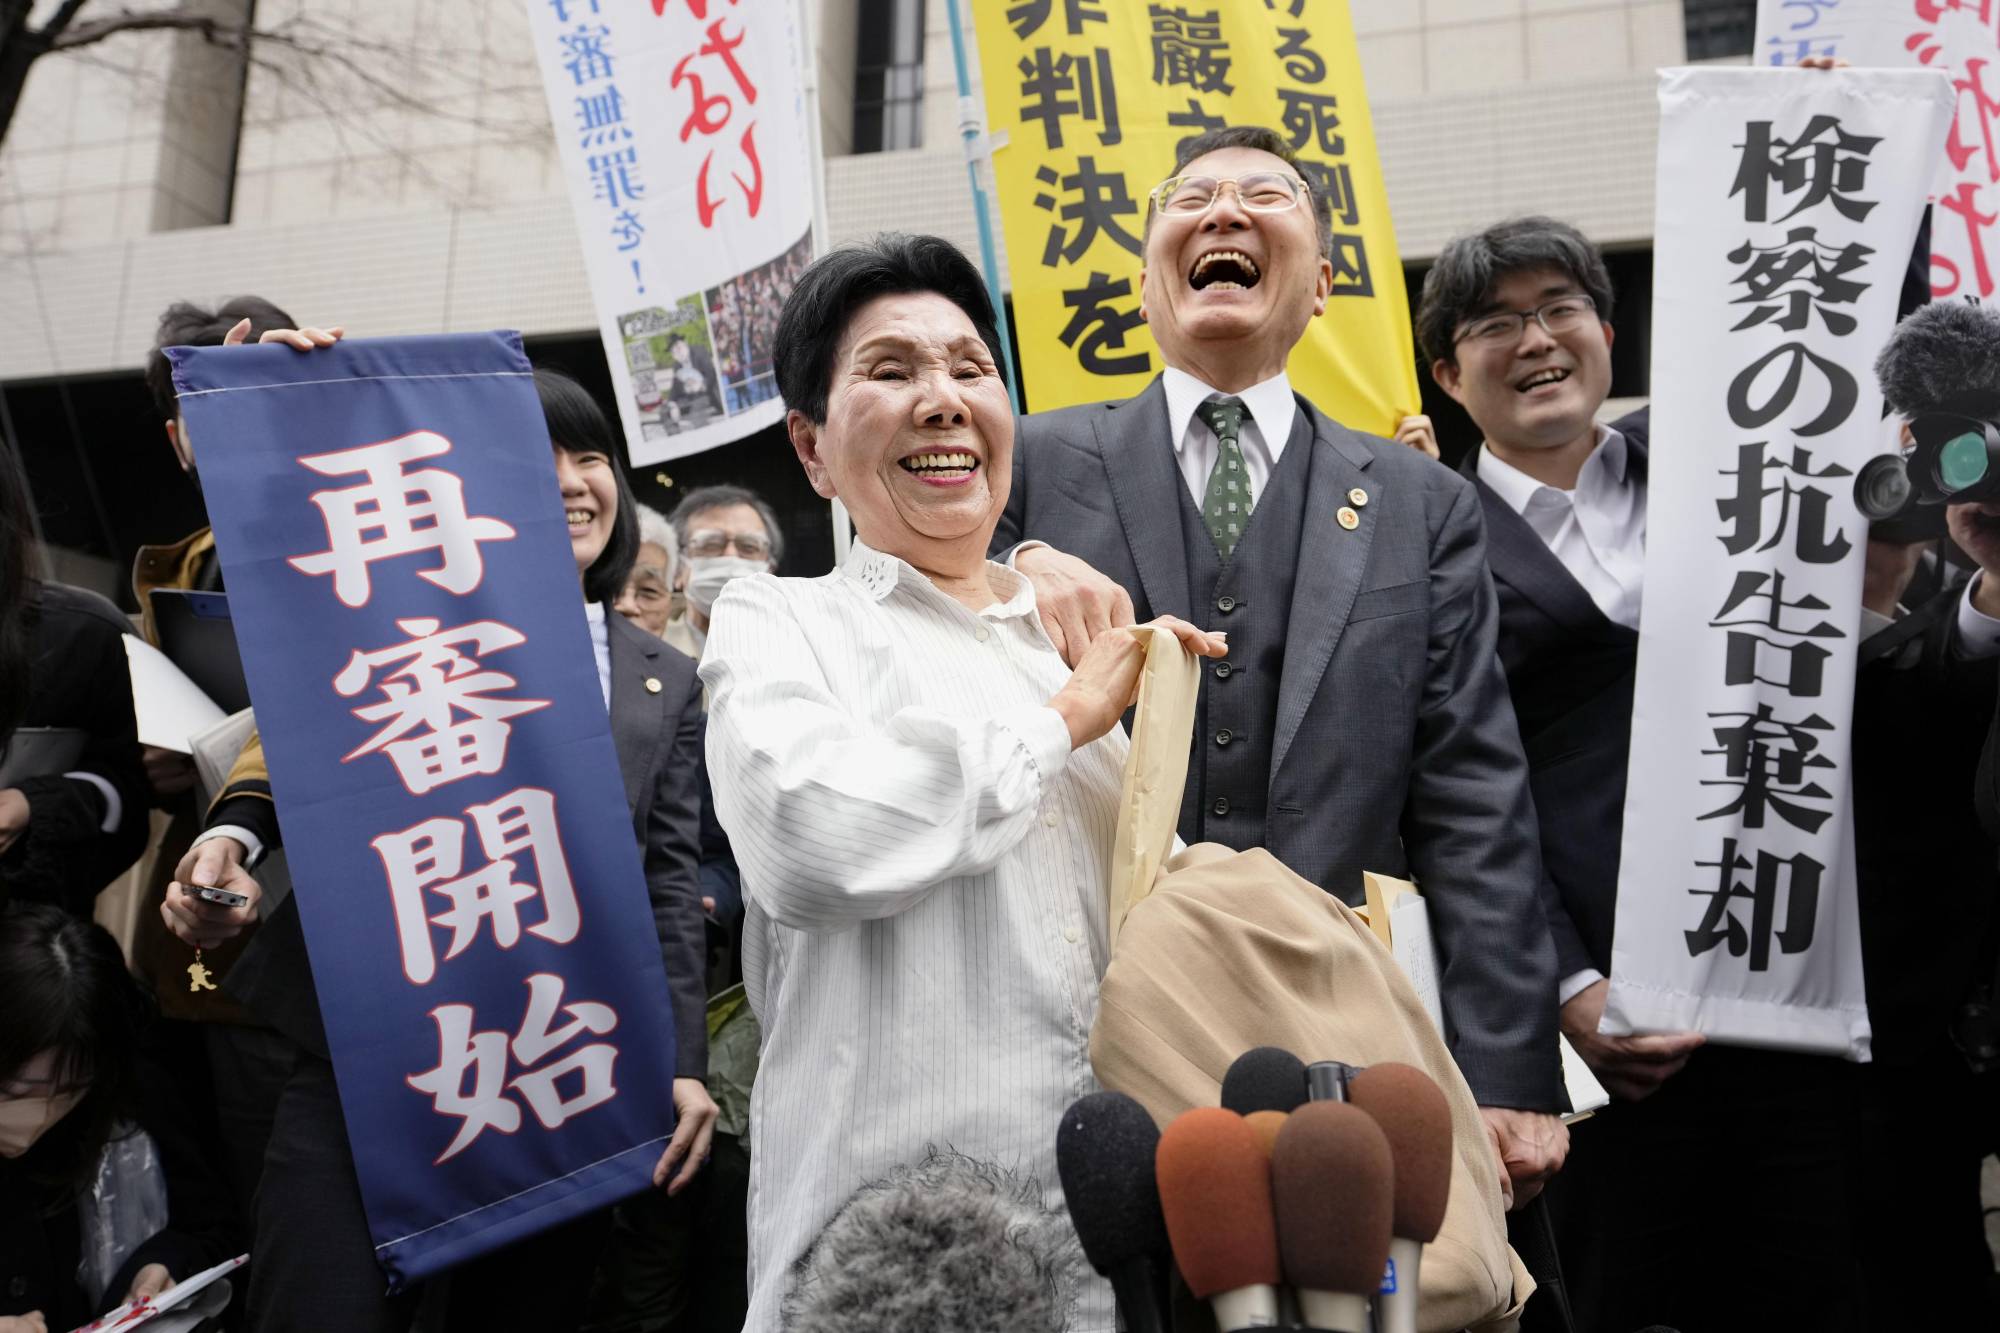 Hideko Hakamata, the elder sister of Iwao Hakamata, reacts Monday after the Tokyo High Court ordered a retrial for her brother nearly six decades after the 1966 murder he was convicted in. | KYODO